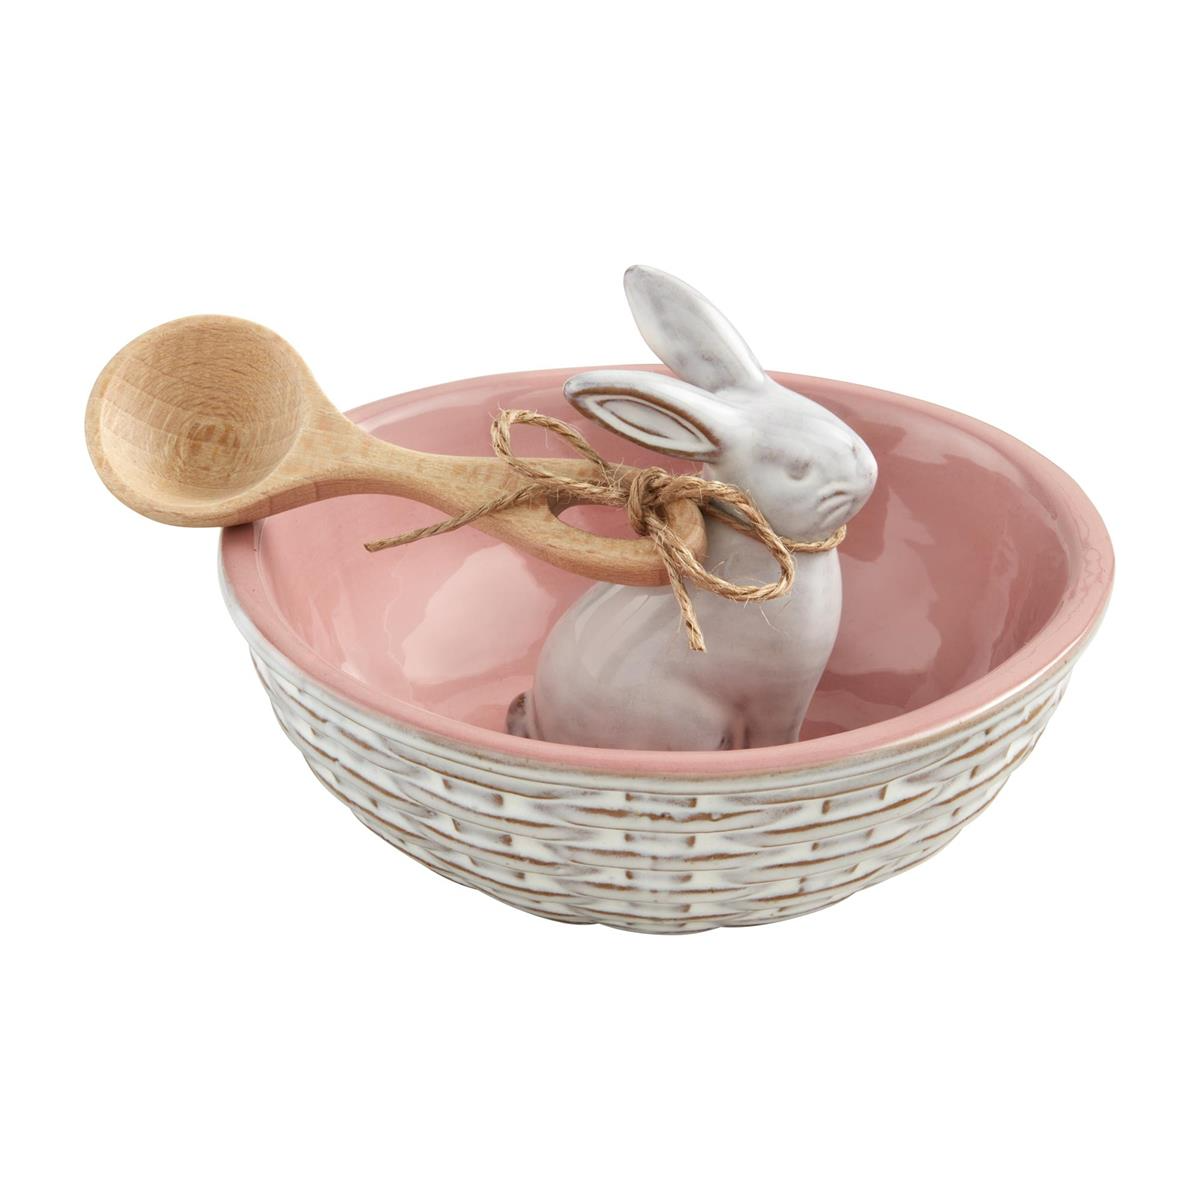 Bunny Candy Dish Sets in Assorted Colors--Lemons and Limes Boutique